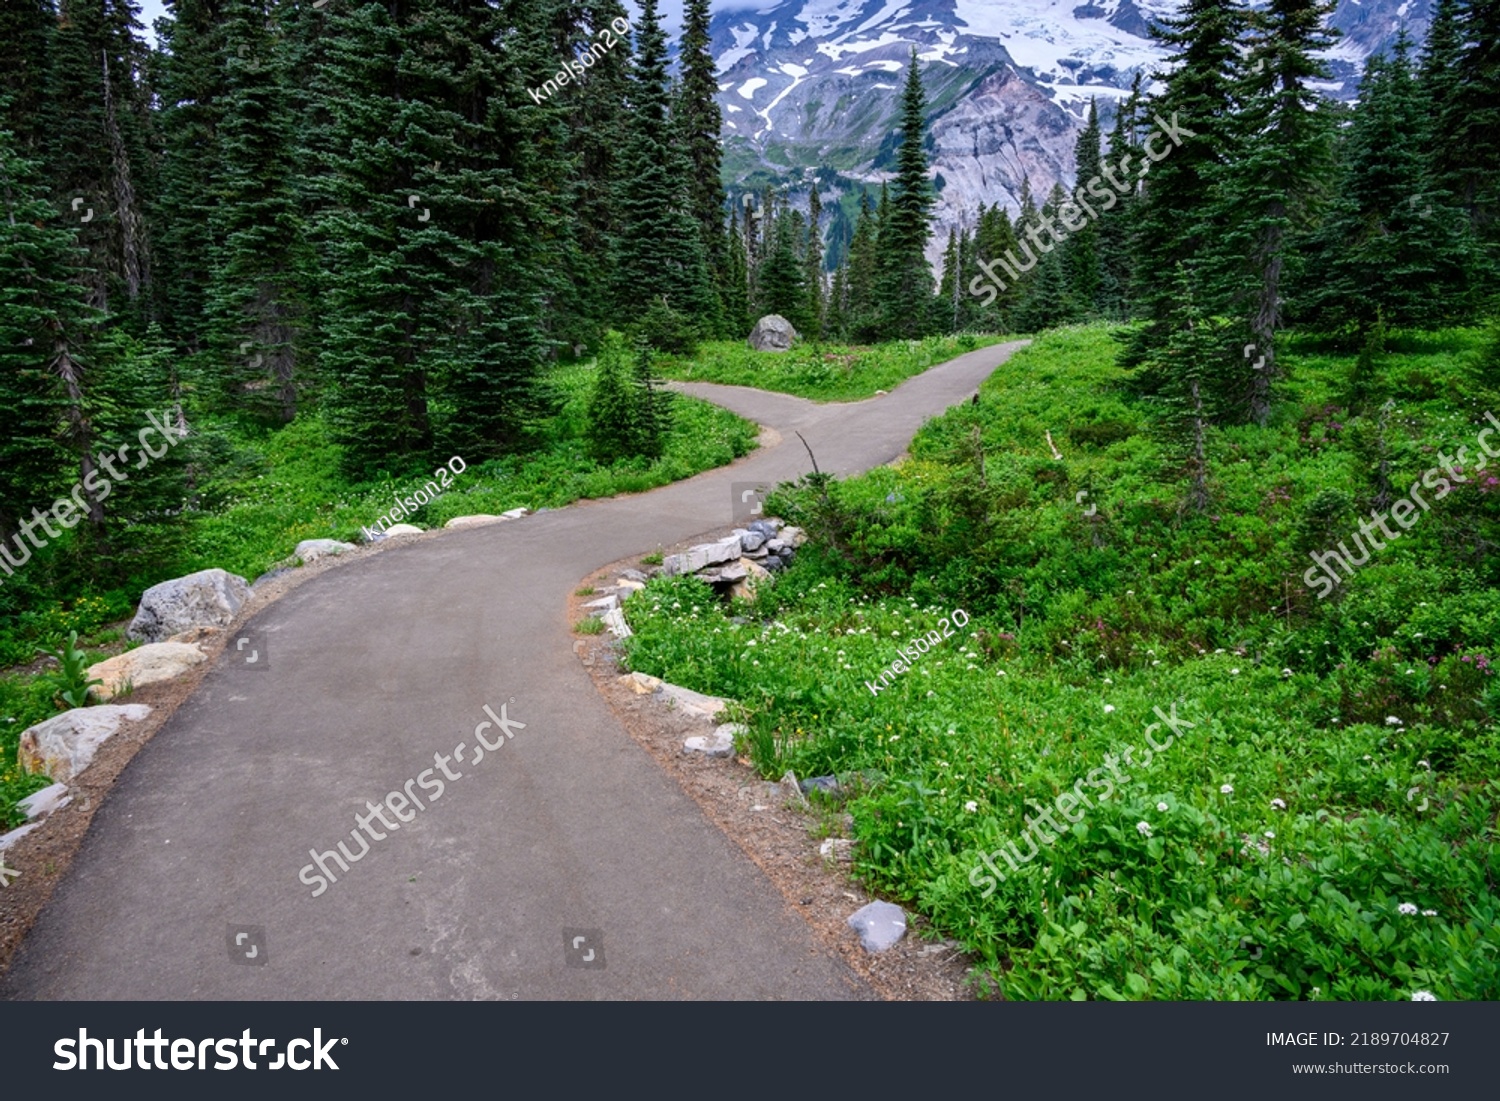 Nisqually Vista Trail through an alpine meadow and woods, Paradise area at Mt. Rainier national park
 #2189704827